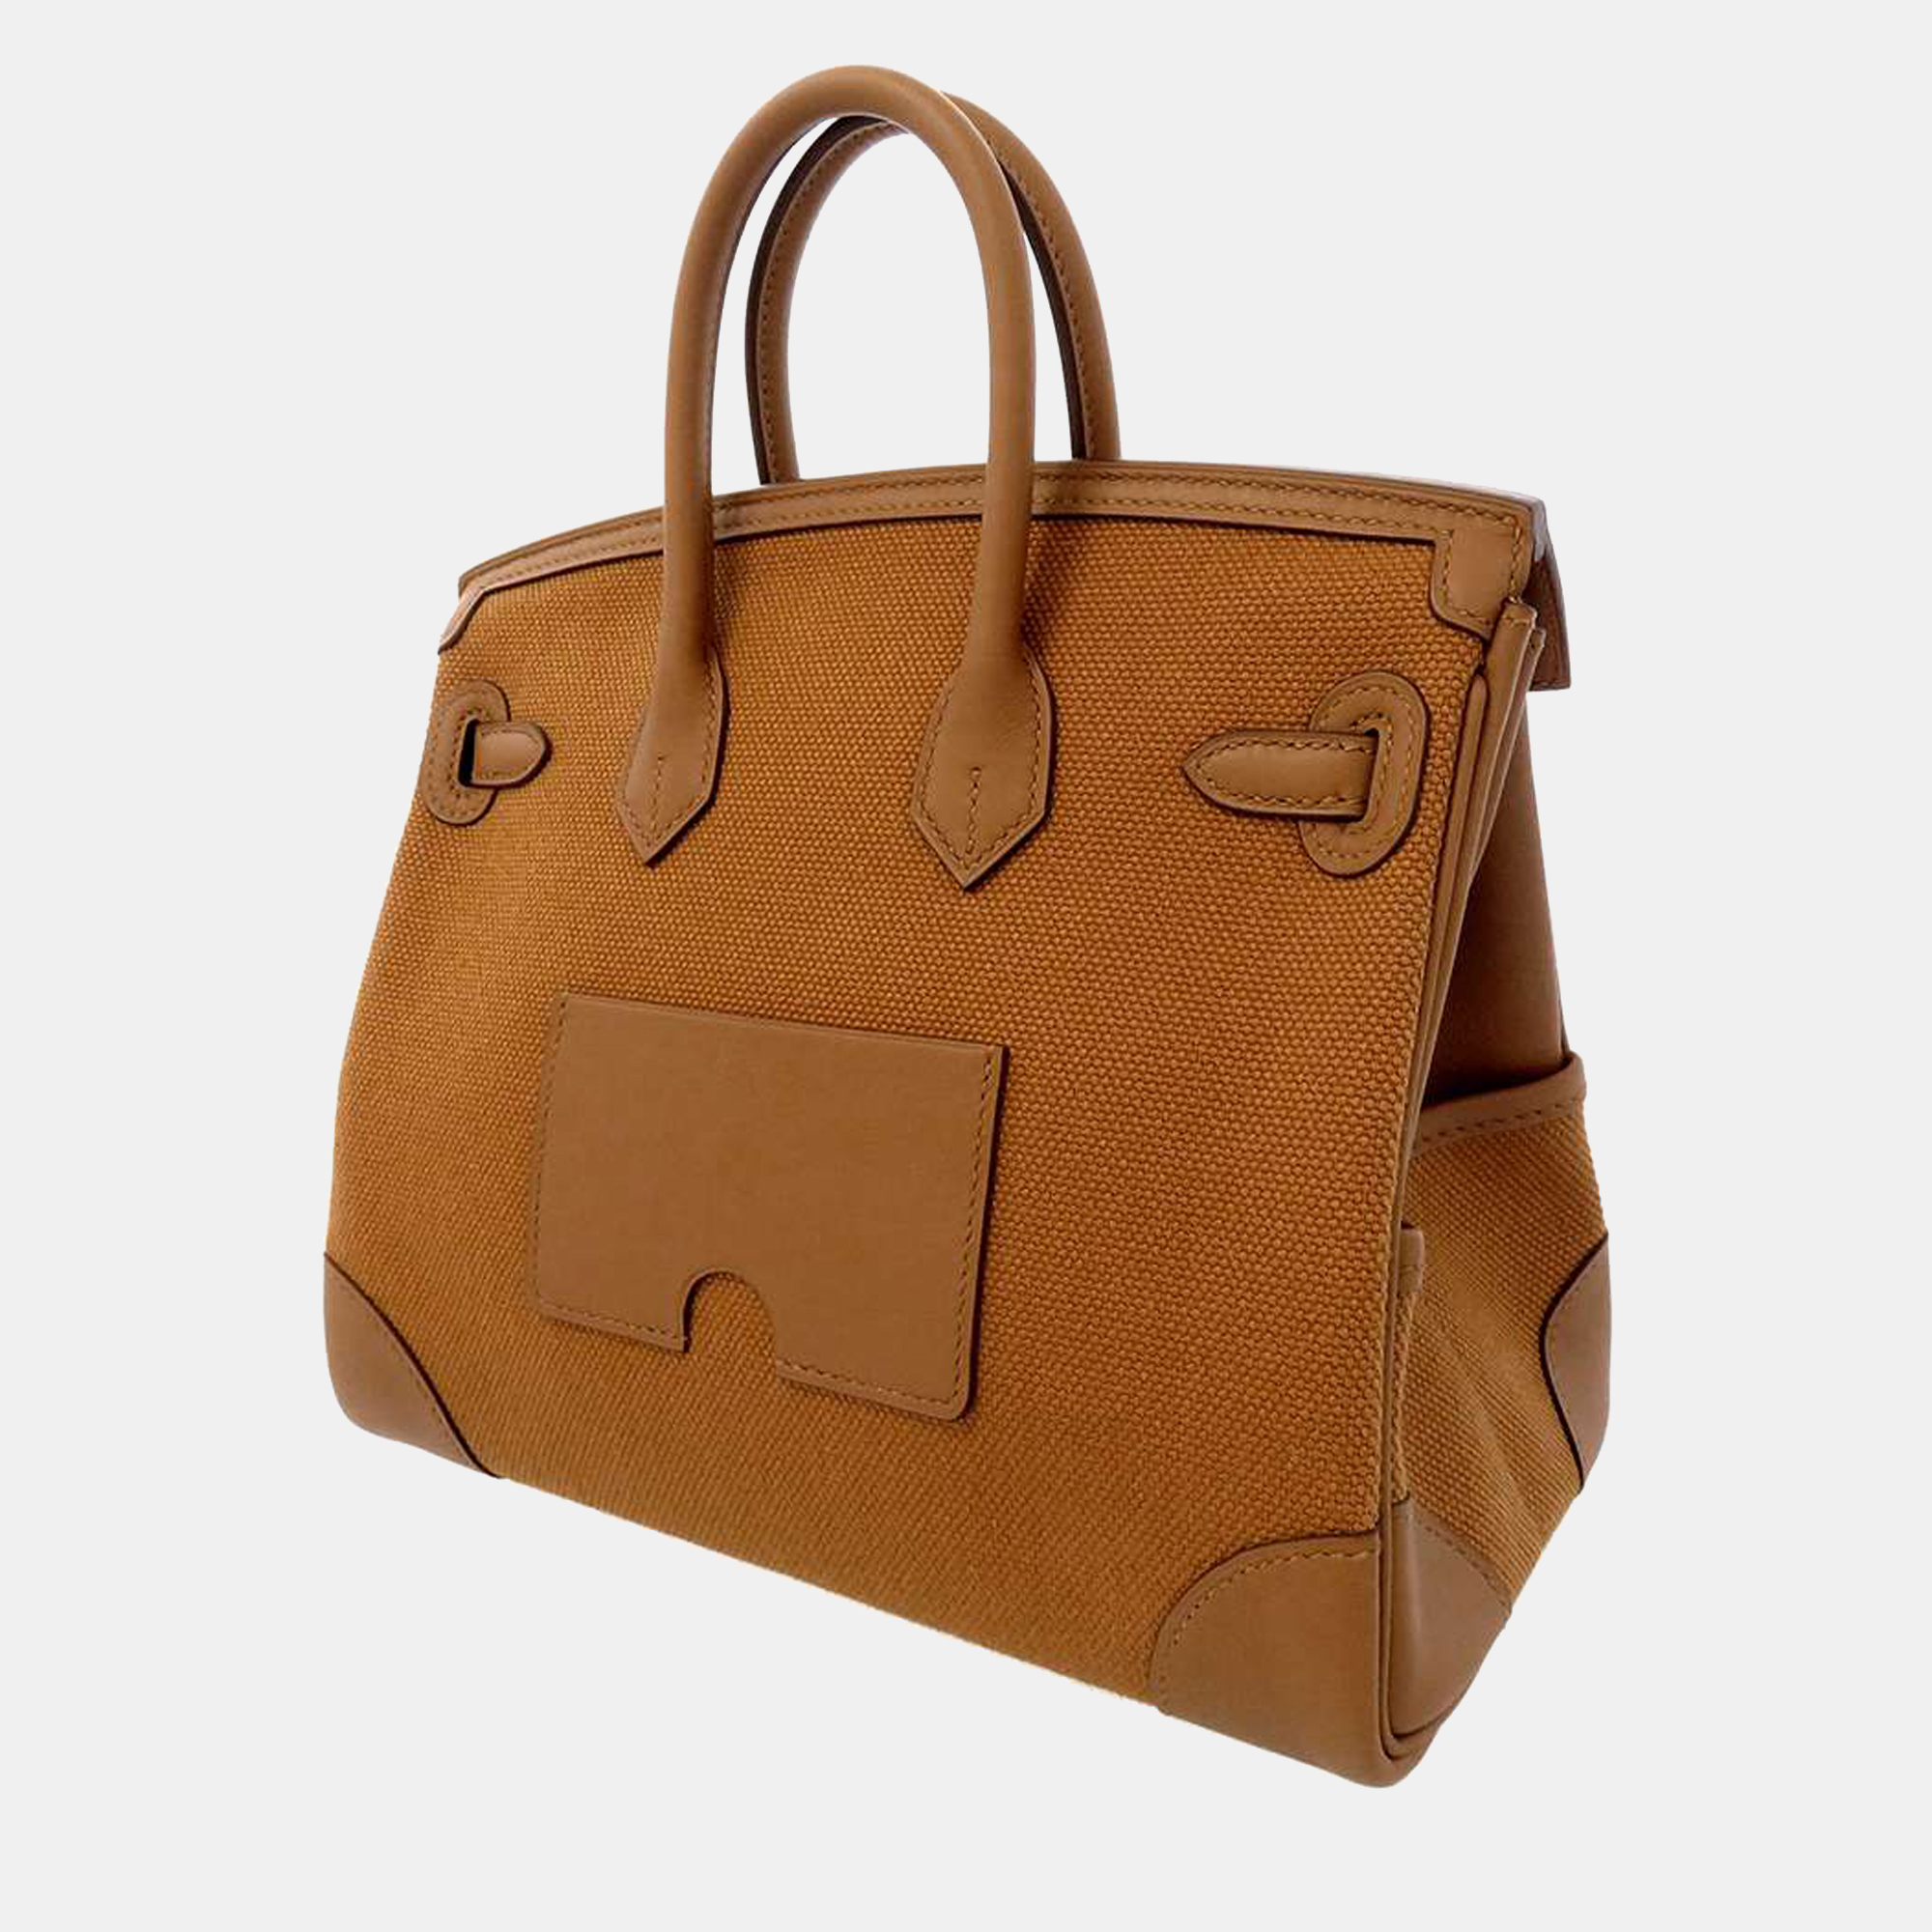 

Hermes Gold Toile Canvas and Swift Leather Palladium Plated Hardware Birkin Cargo 25 Tote Bag, Brown